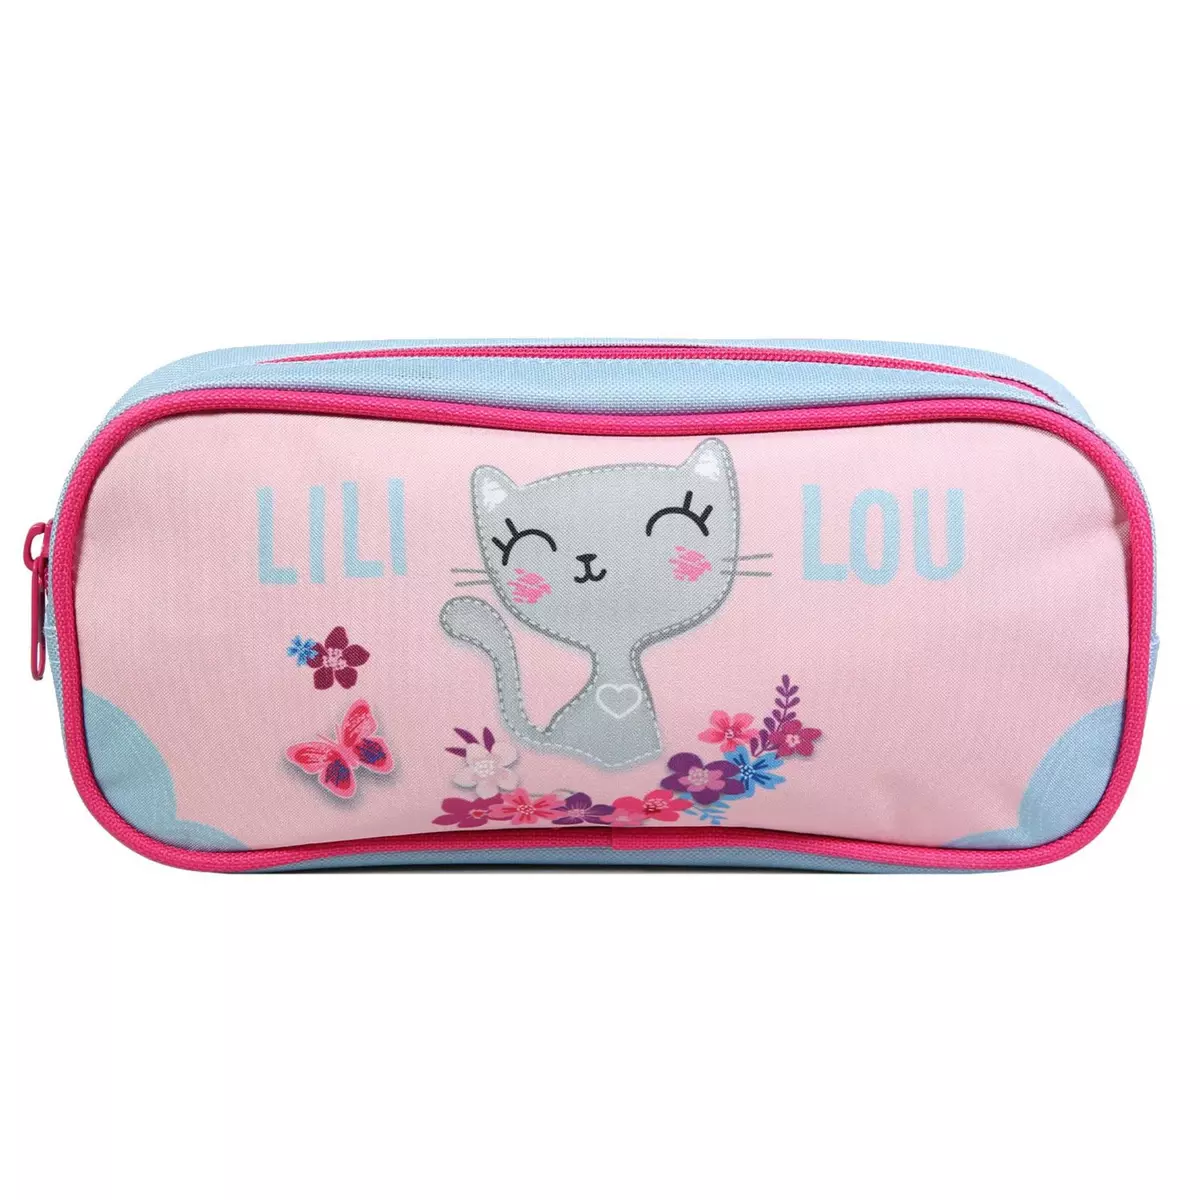 Bagtrotter BAGTROTTER Trousse scolaire rectangulaire Lili Lou Rose